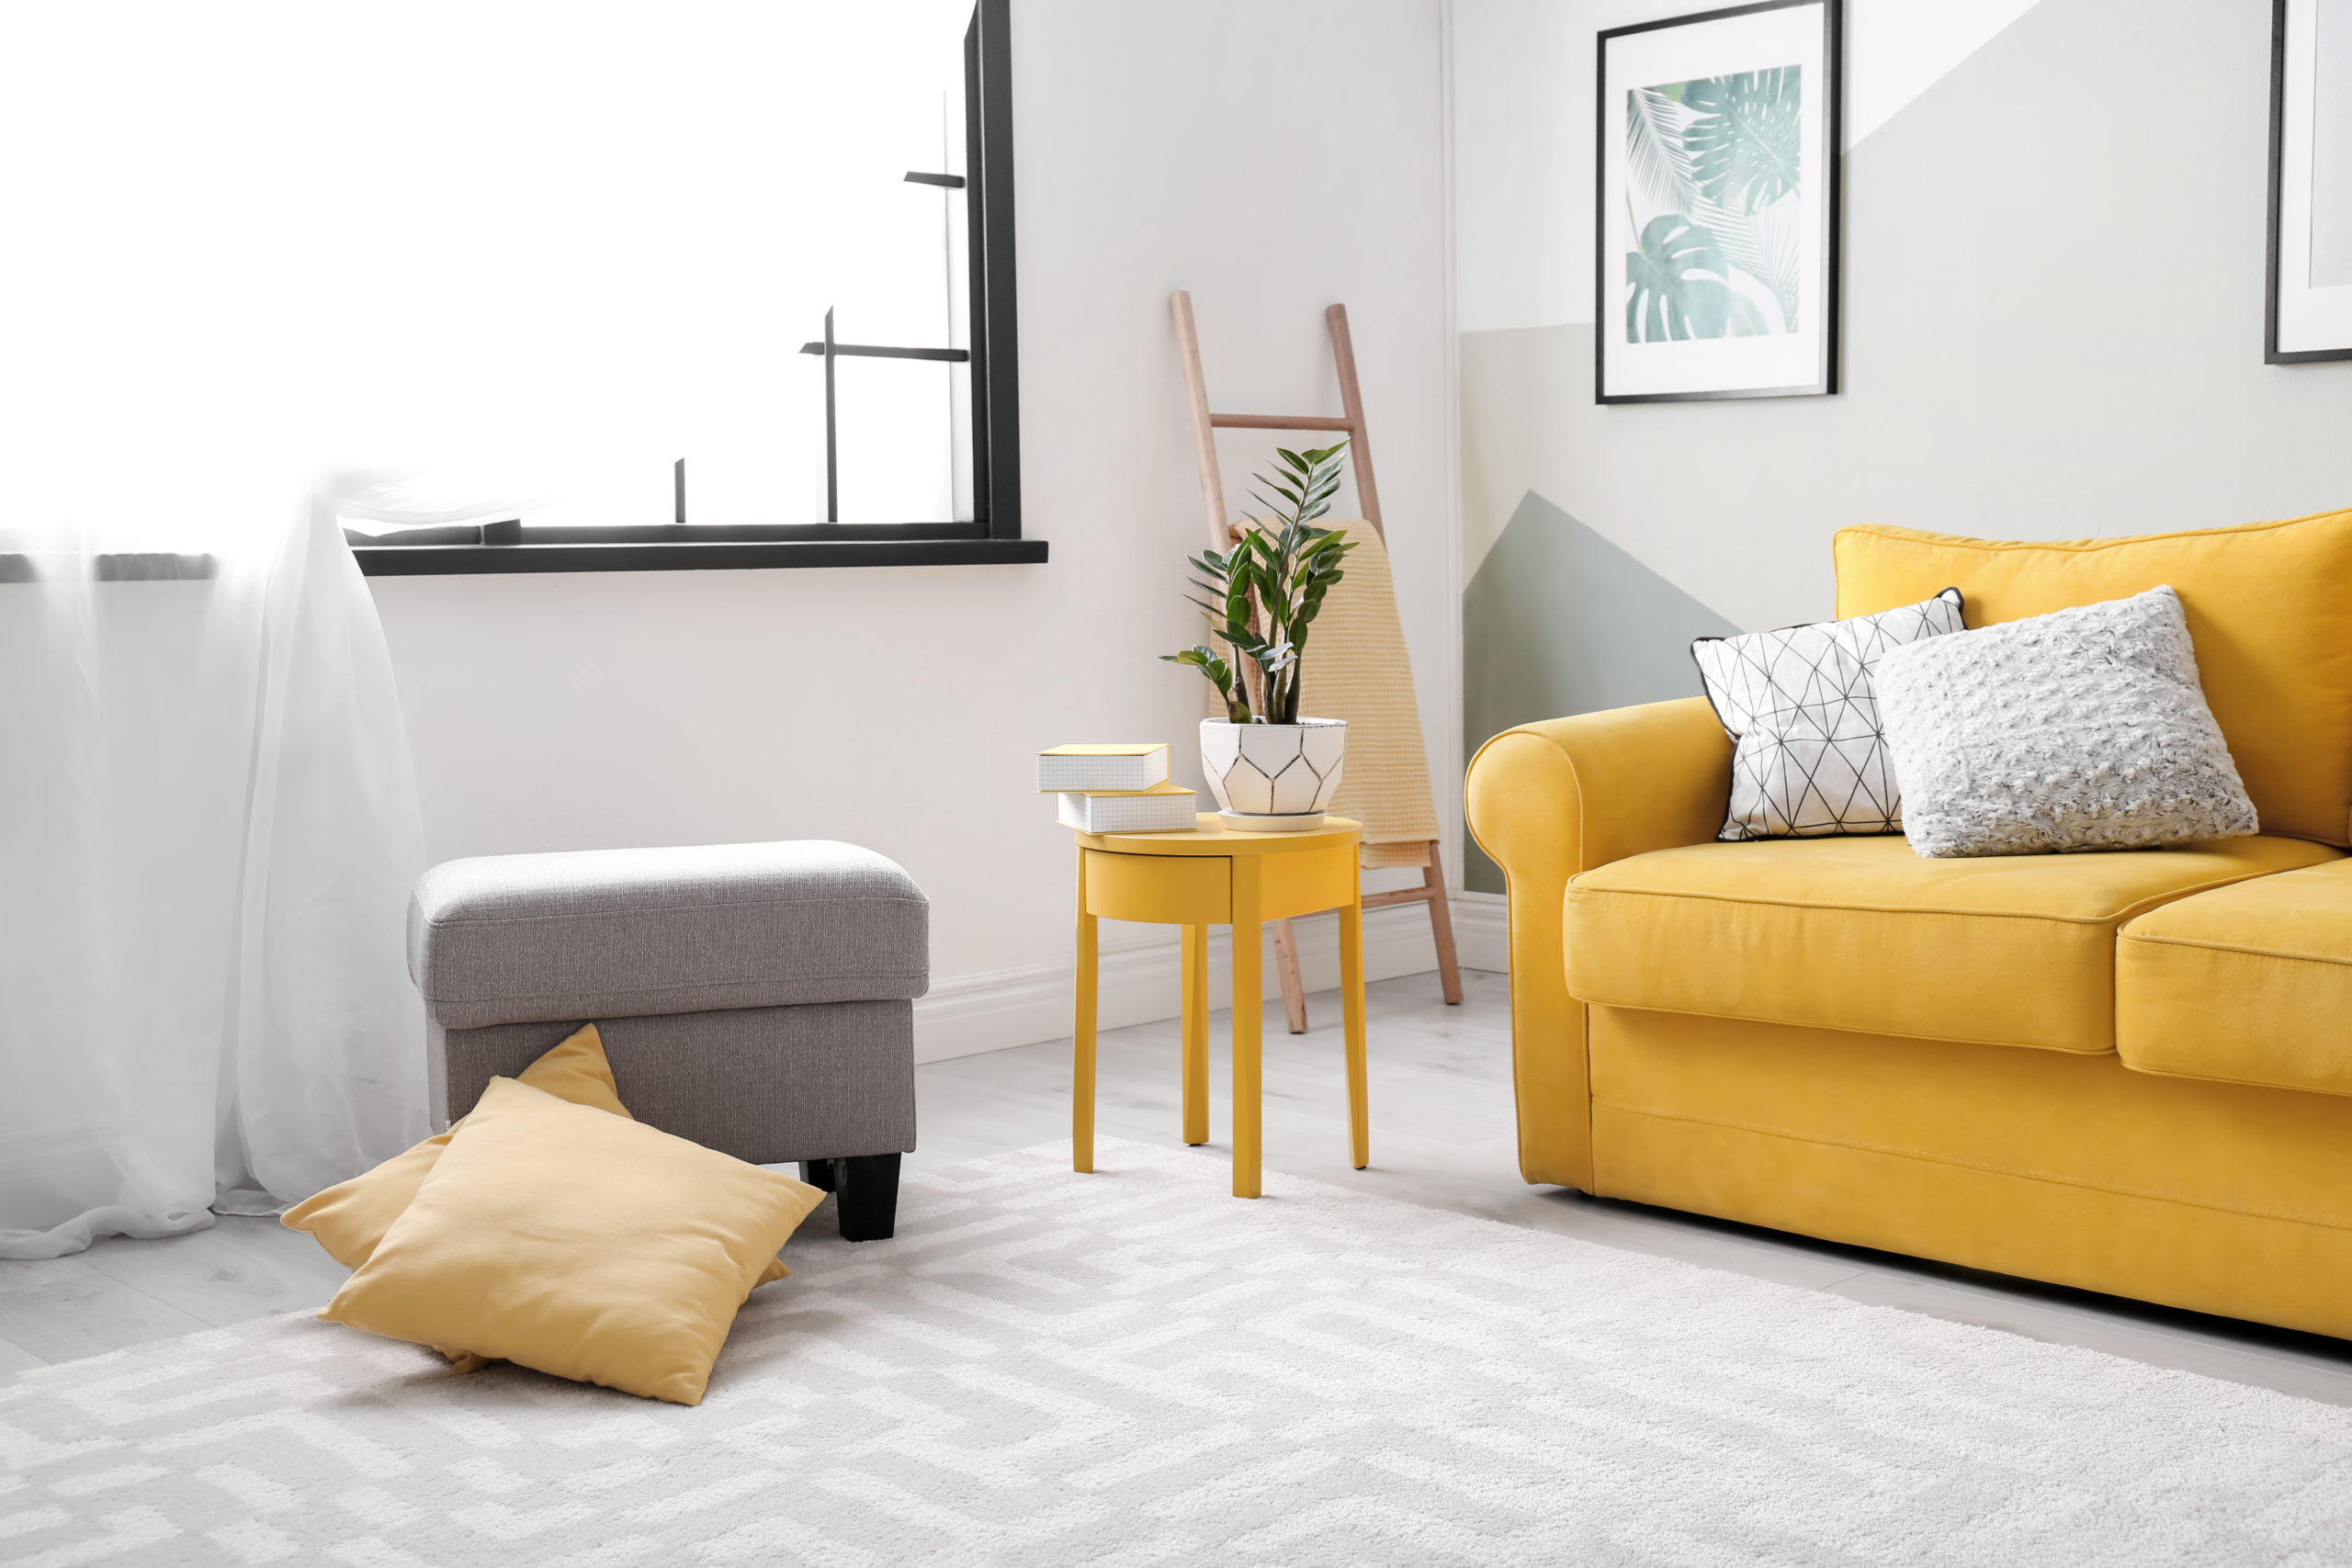 Living Room With Pale Yellow Sofa